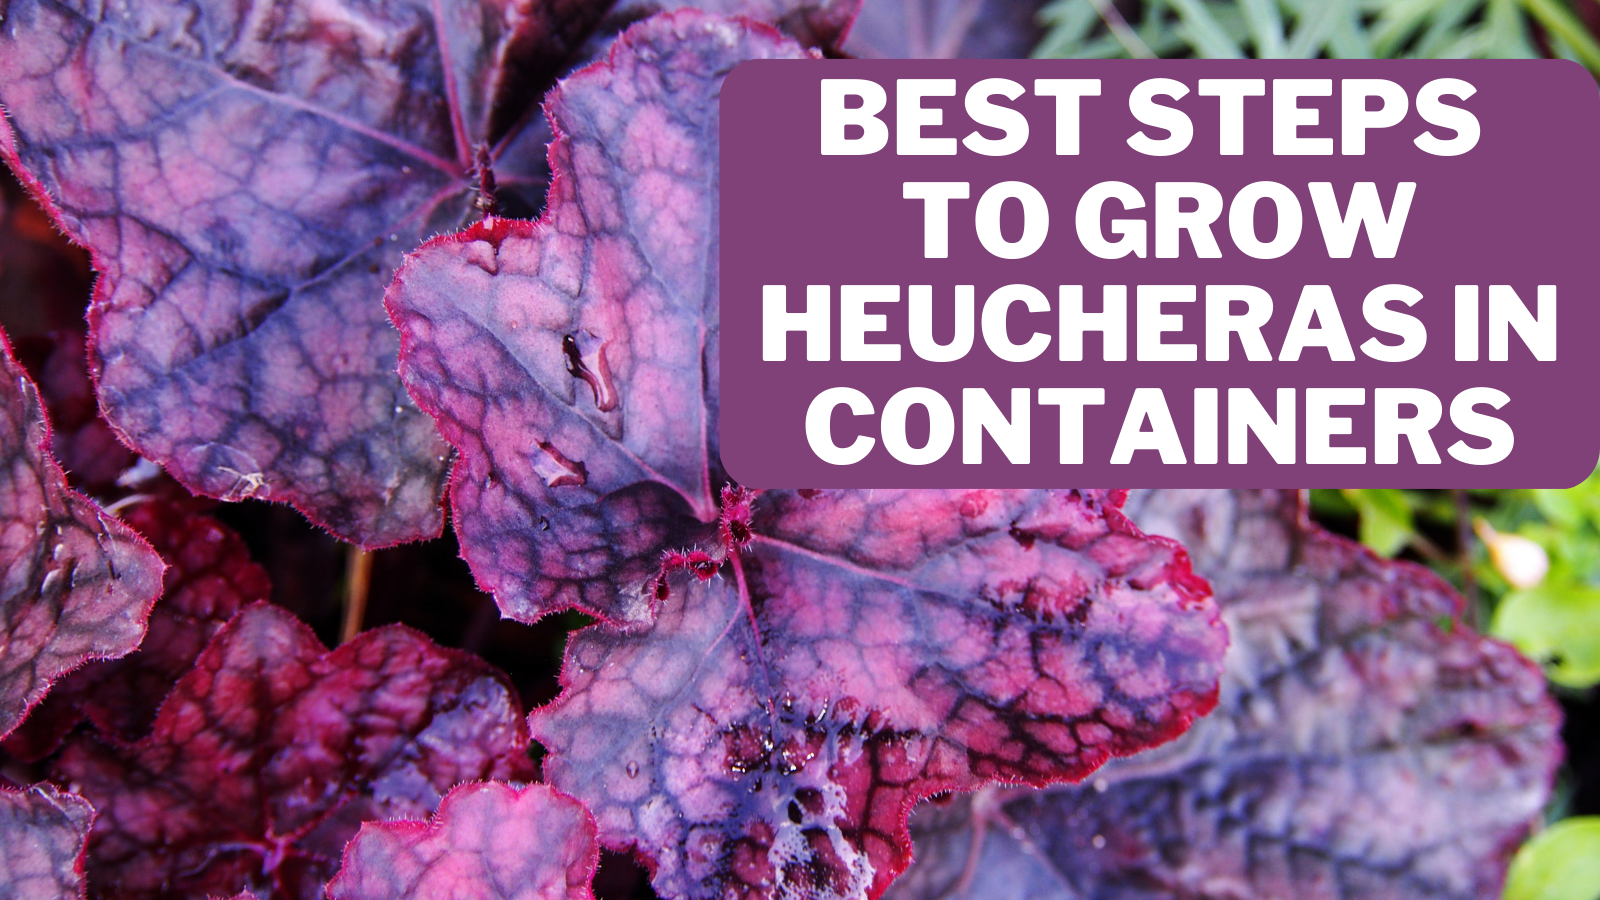 Best Steps To Grow Heucheras In Containers